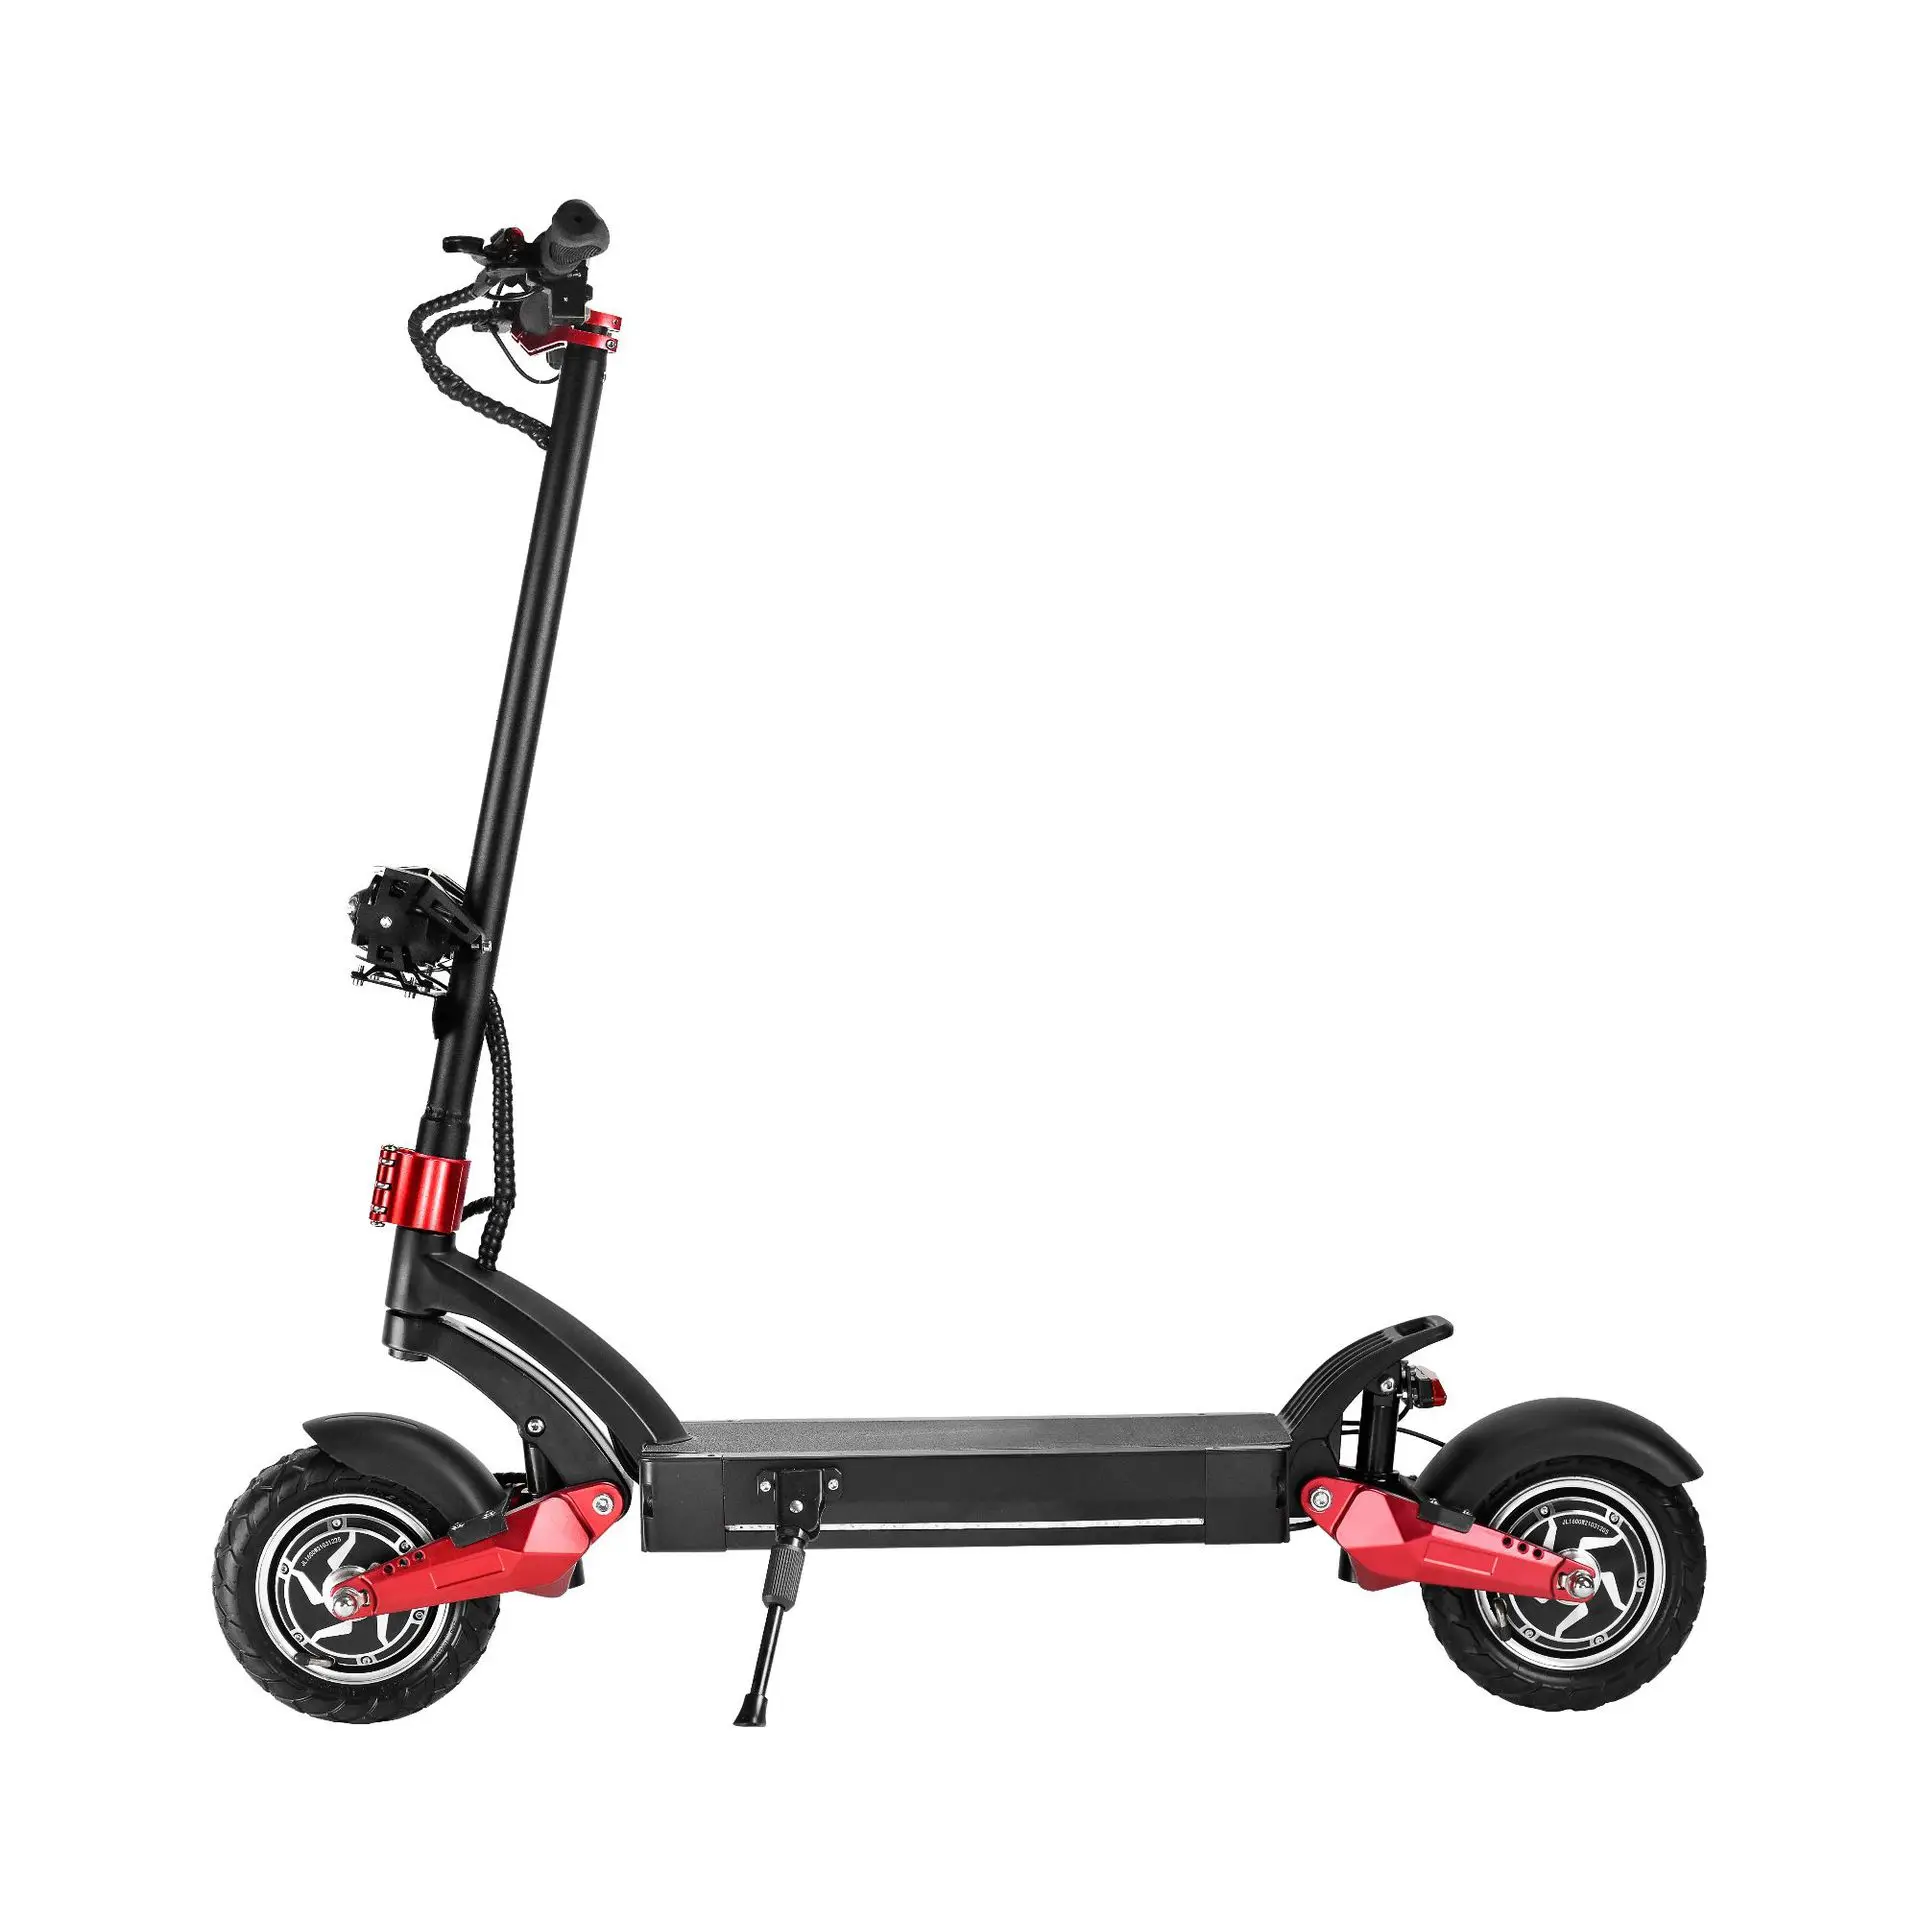 

52V 3200W 60mph two wheel smart balance dual motor electric scooter with CE FCC ROHS OEM ODM EU and US warehouse